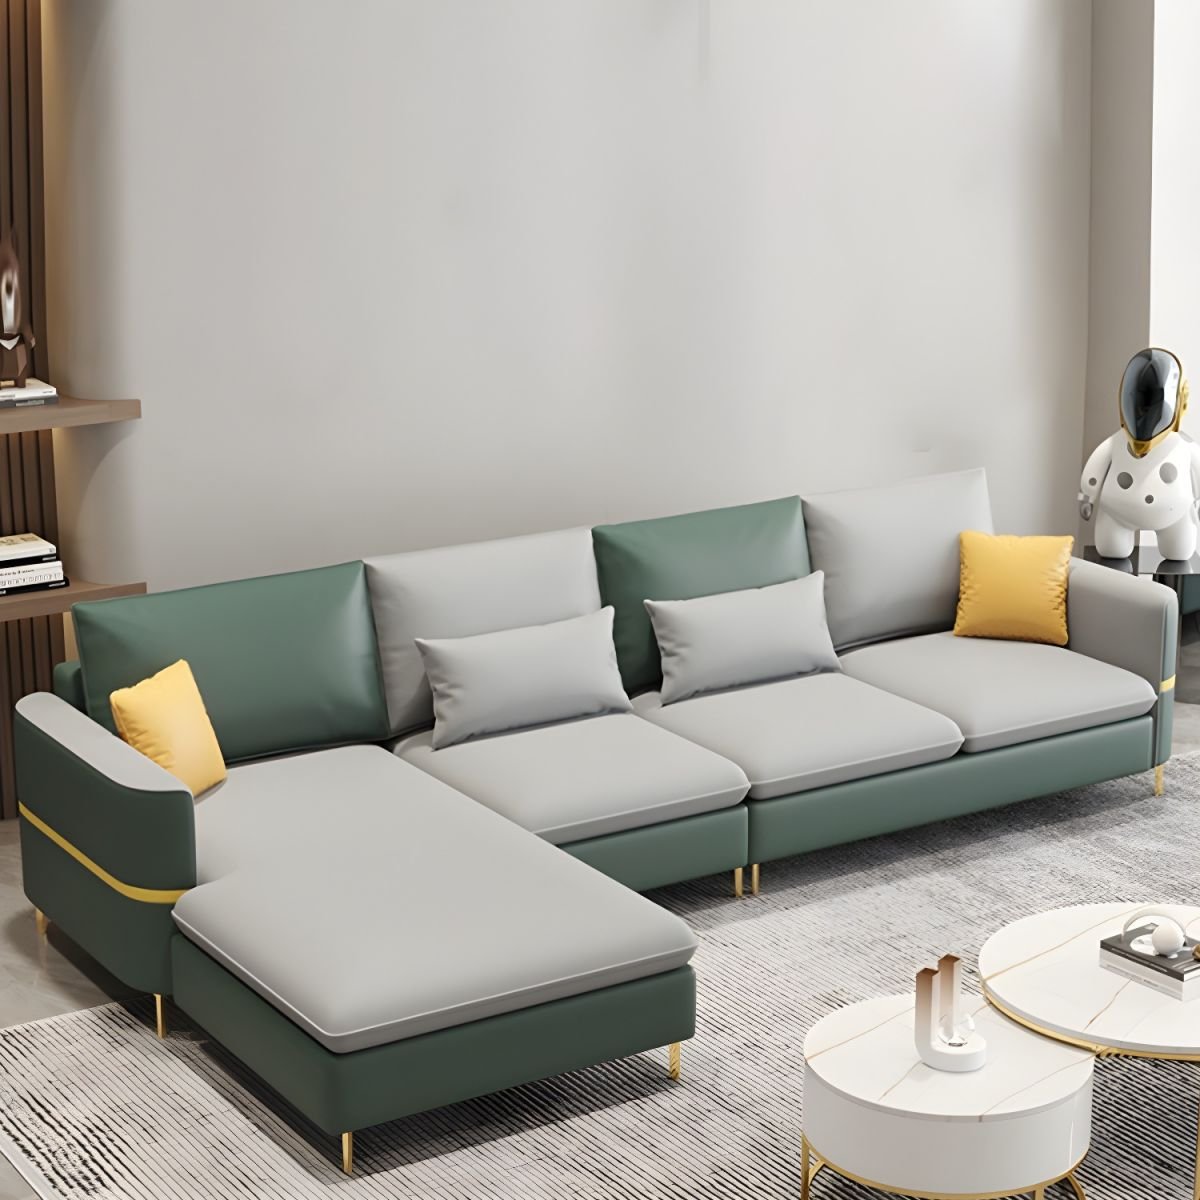 Glamorous Tech Cloth L-Shape Sectional Sofa with Square Arm and Pillow Back in 3 Piece Set - Dark Green/ Light Gray Tech Cloth Latex & Down Left